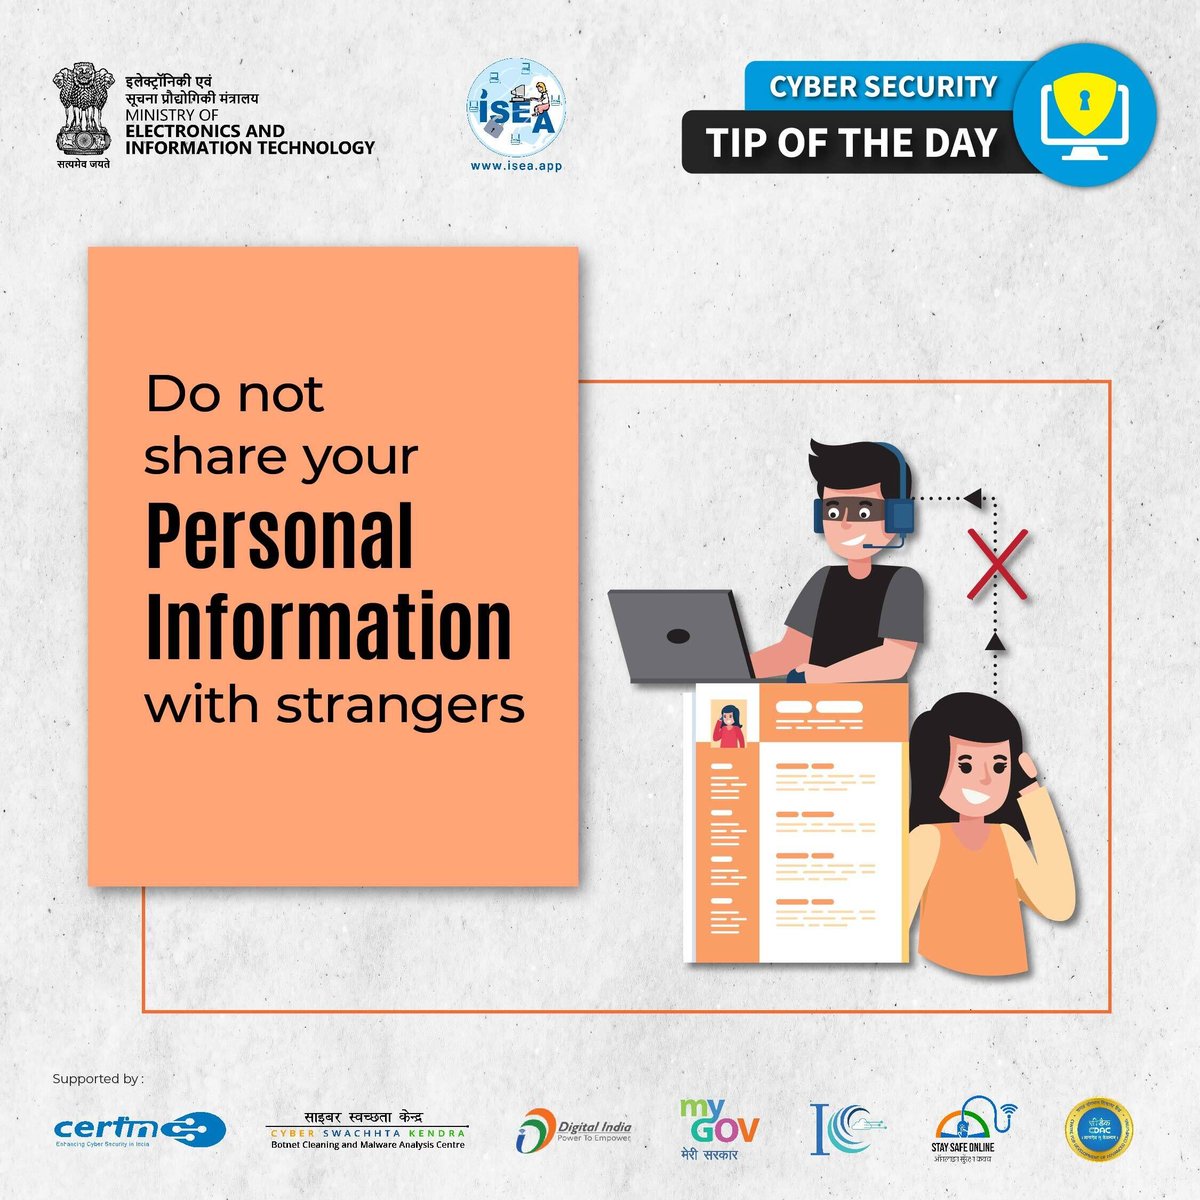 Don't share your personal information
#ToD #ISEA #DigitalNaagrik #CyberSecurity #MEITY
#Tipoftheday